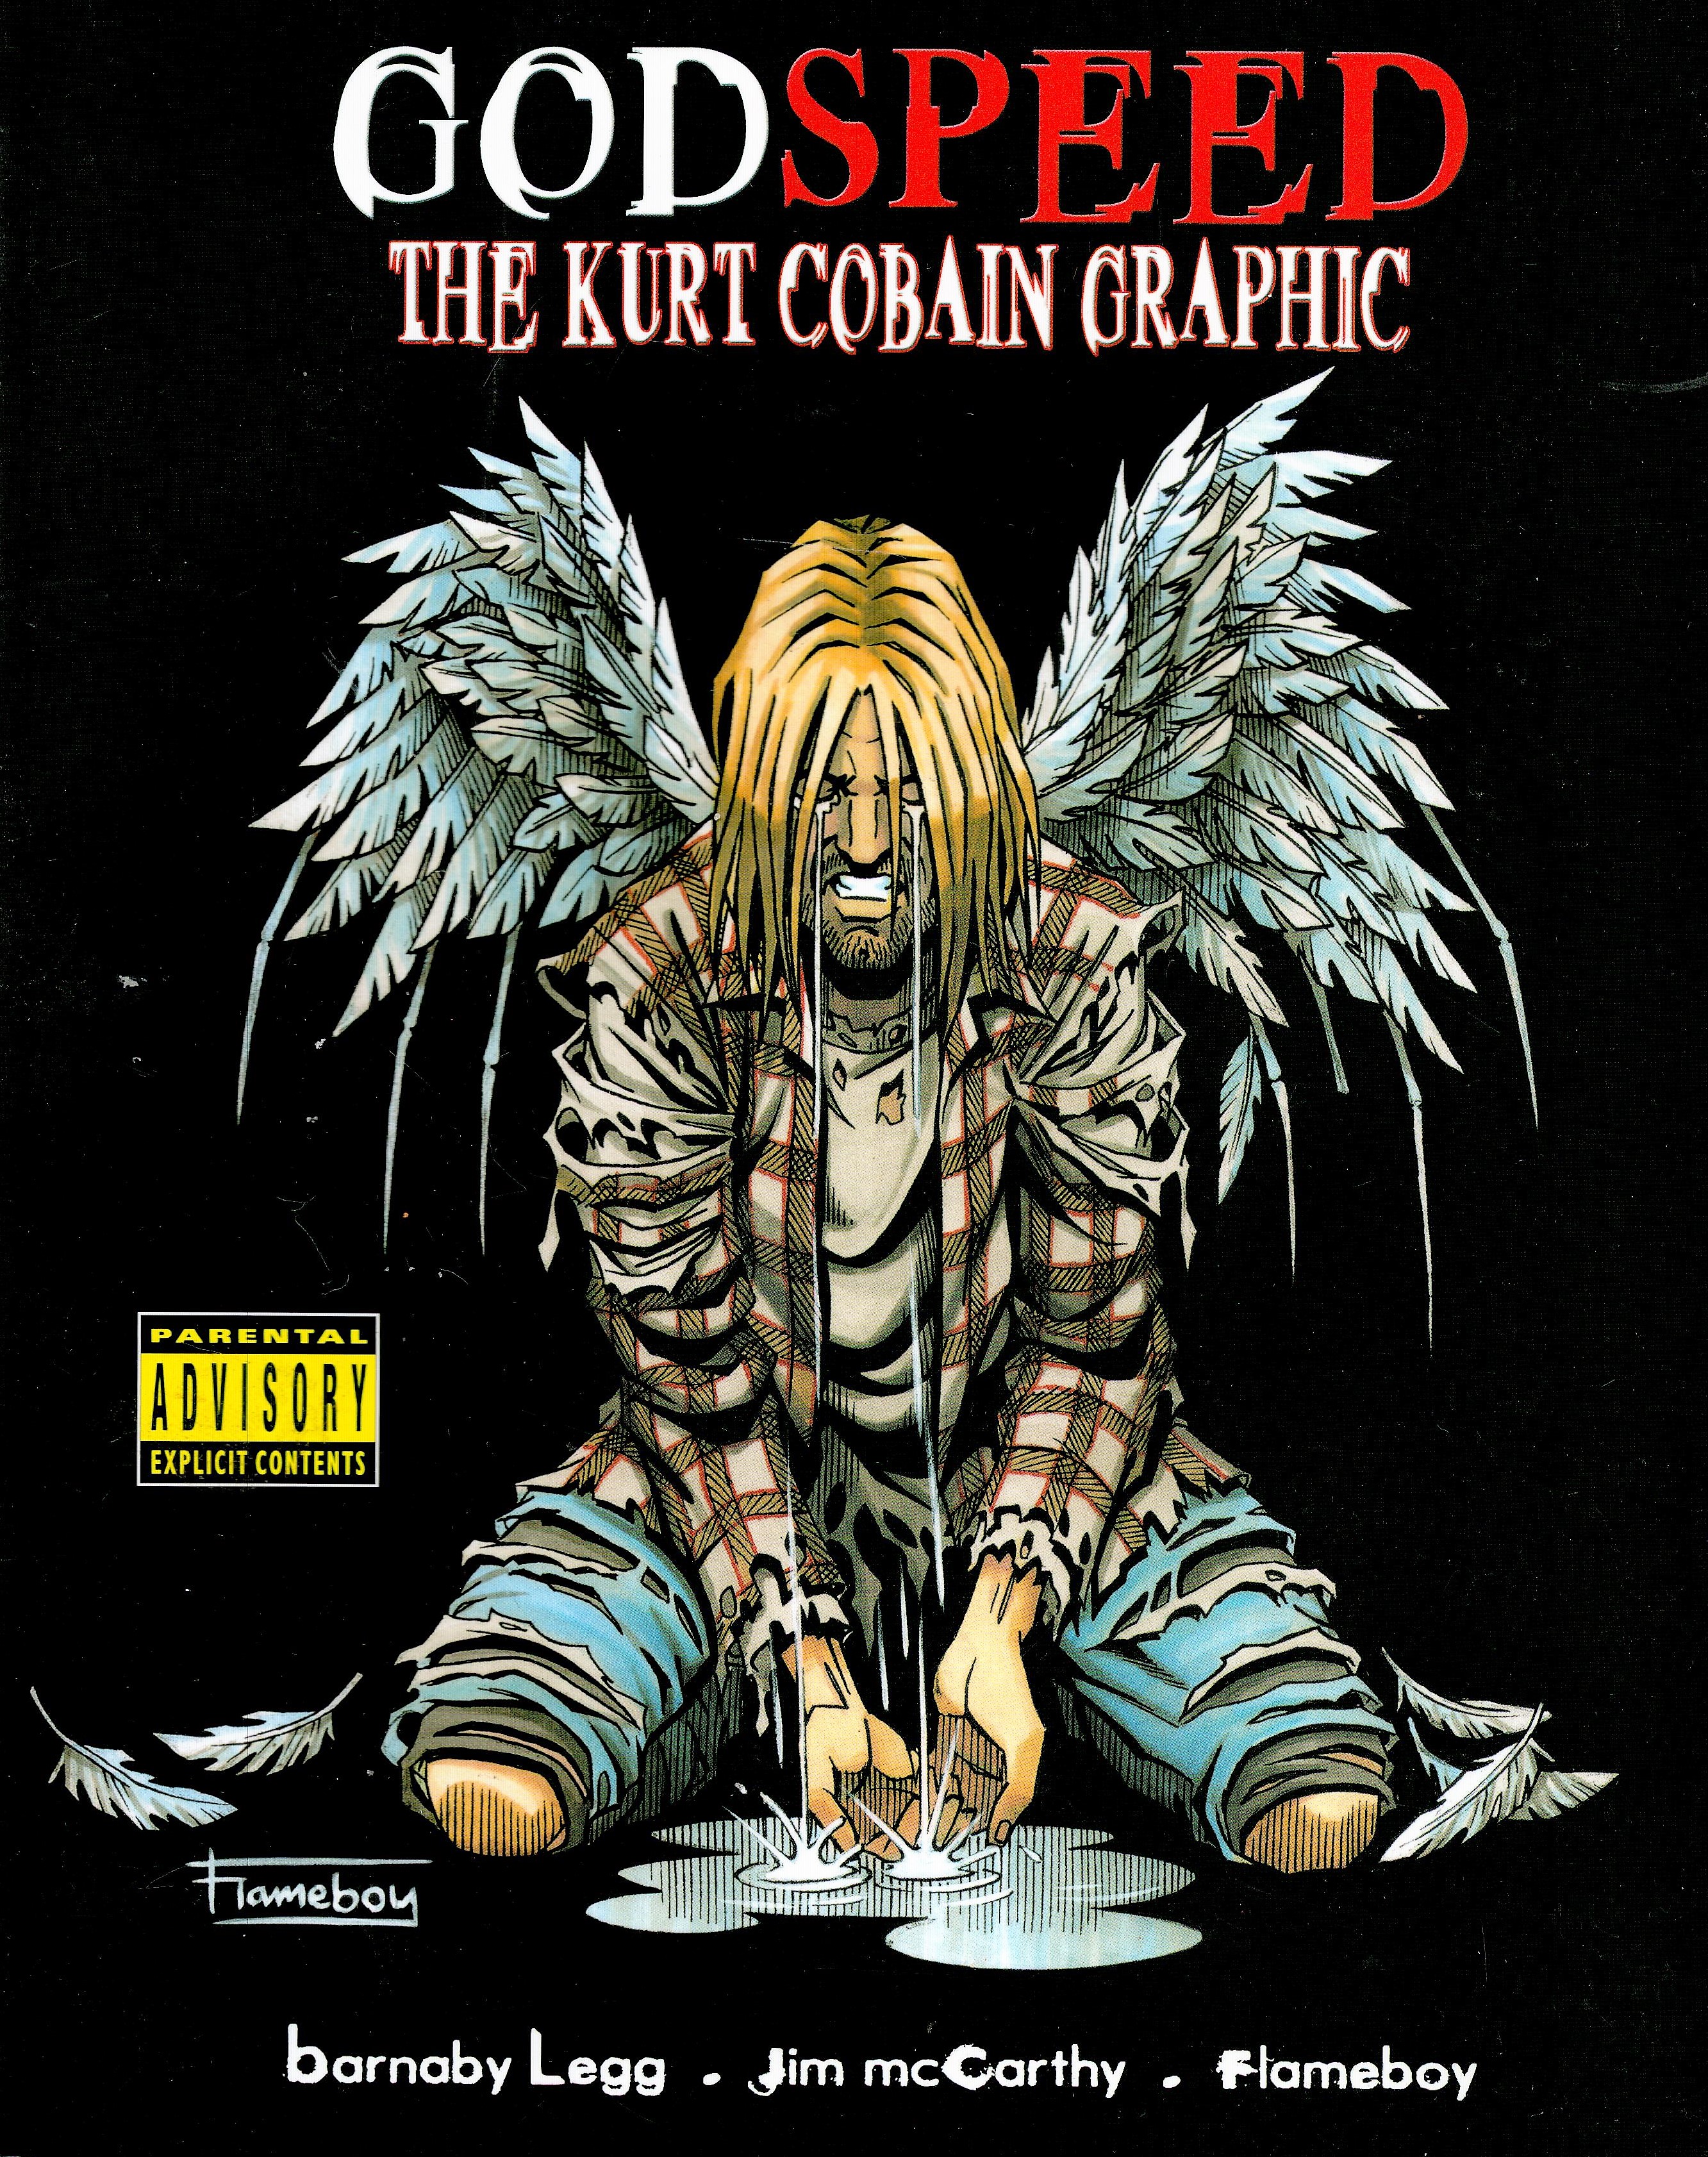 Godspeed The Kurt Cobain Graphic Softback Book 2003 First Edition published by Omnibus Press some